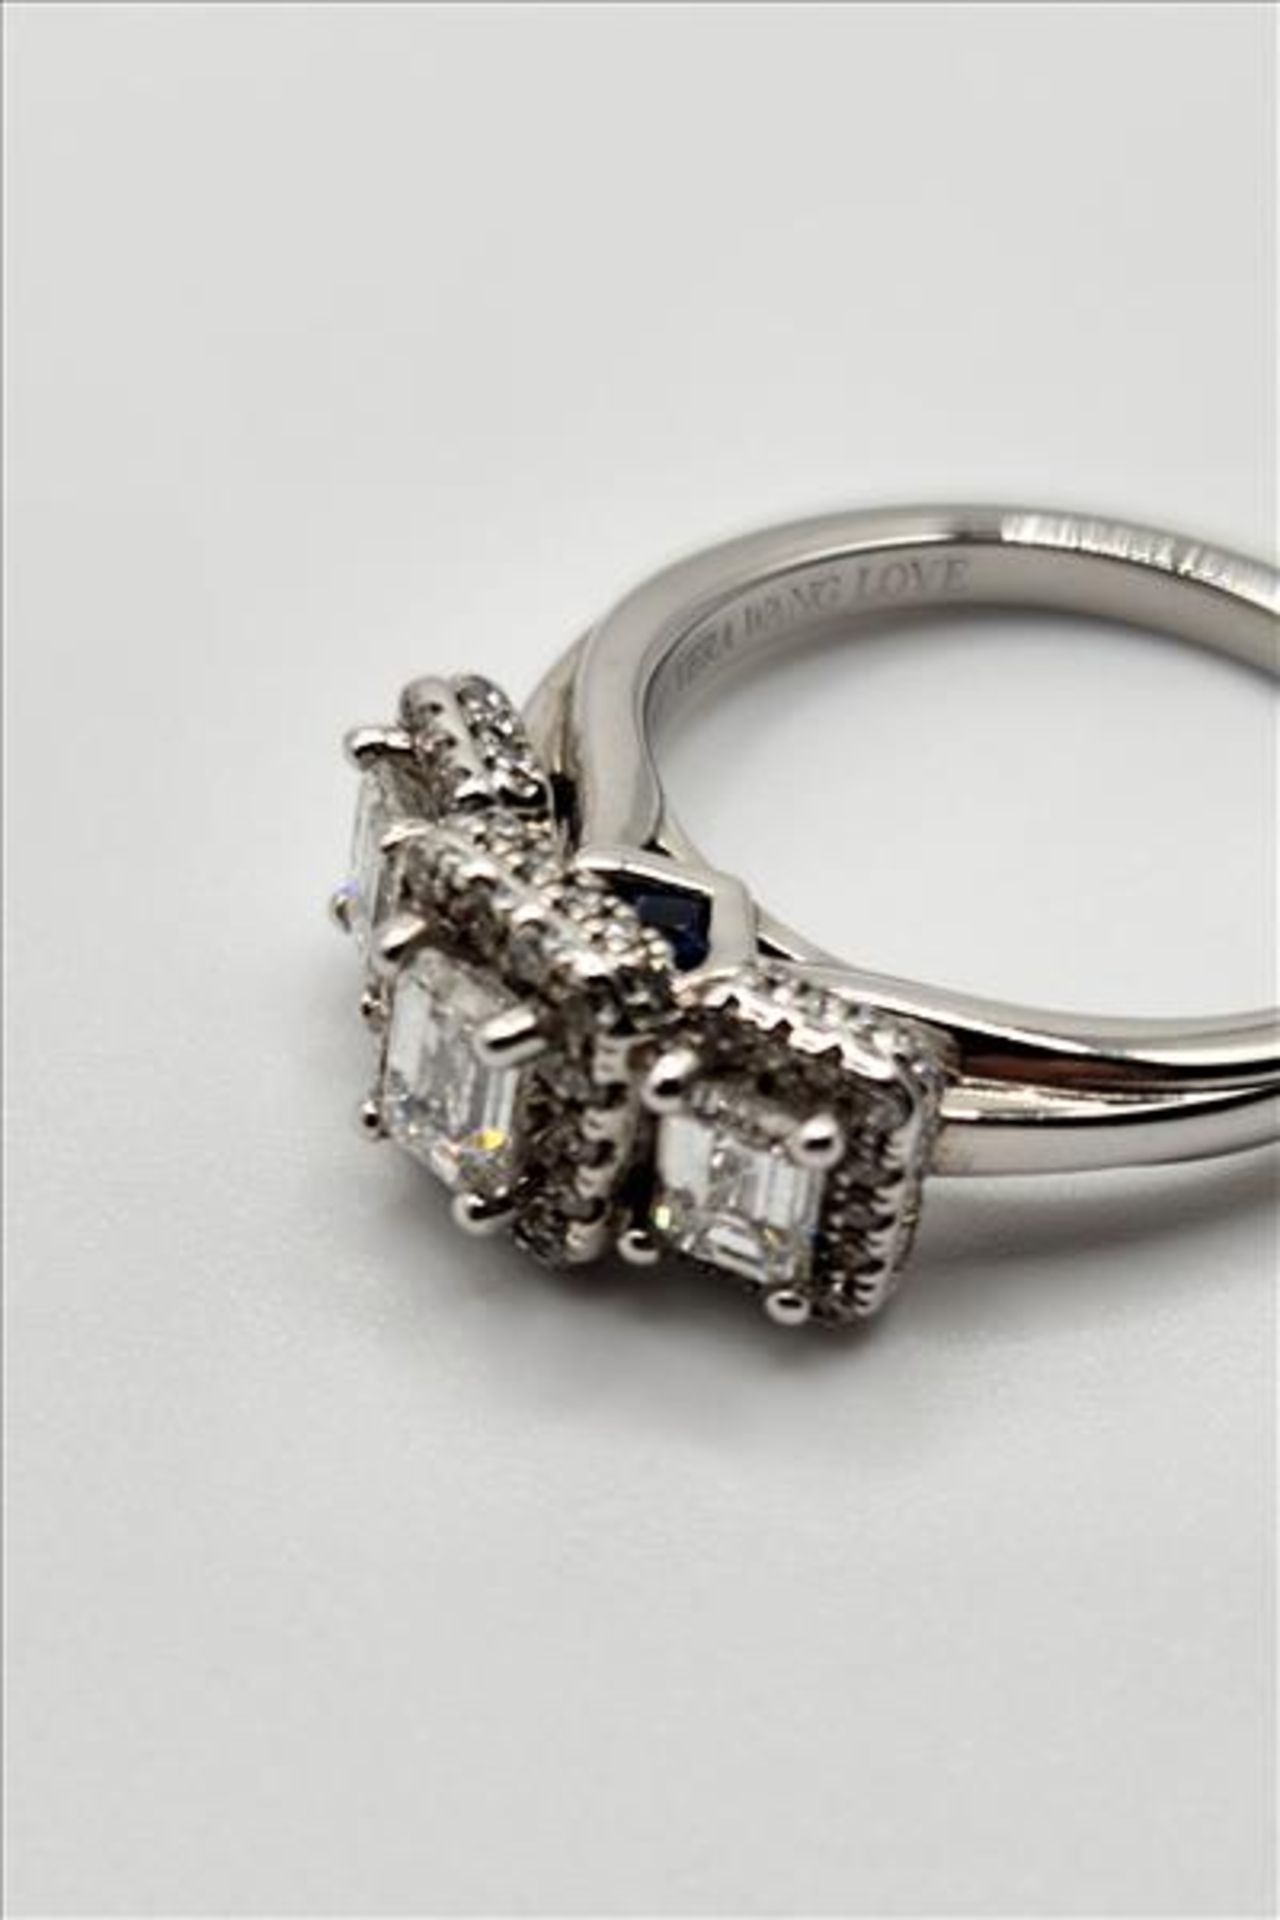 One lady’s stamped and tested 14kt VERA WANG LOVE collection diamond ring. Contained across the - Image 2 of 11